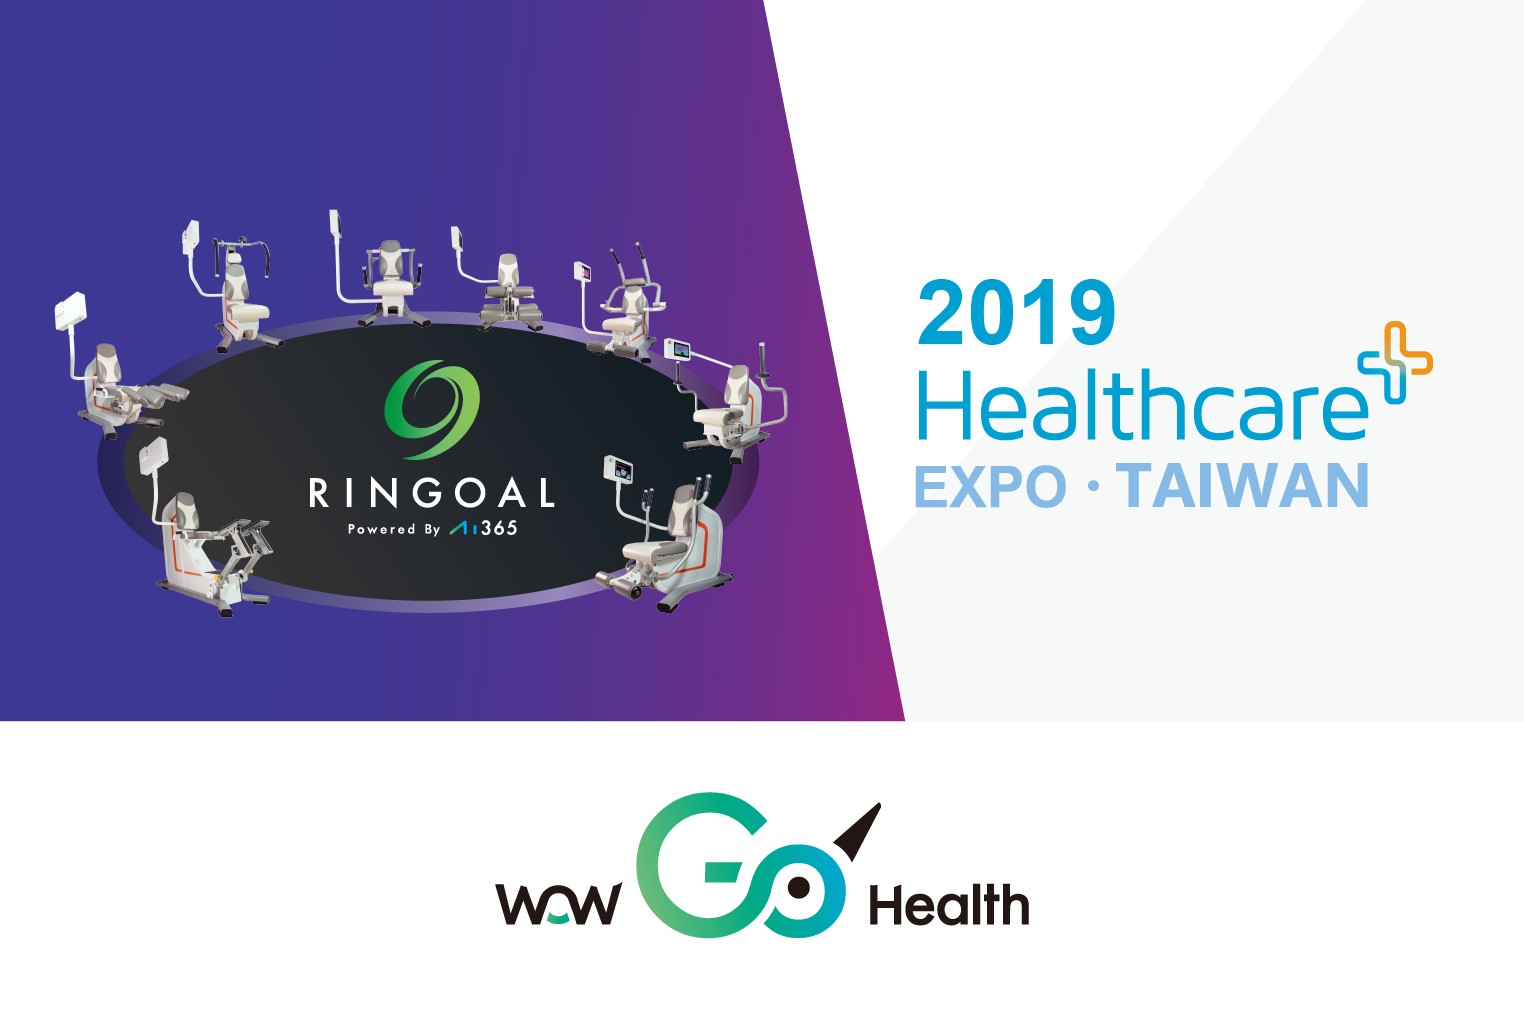 GoldenSmartHome Tecnology Corp. is going to participate in Taiwan Healthcare EXPO!